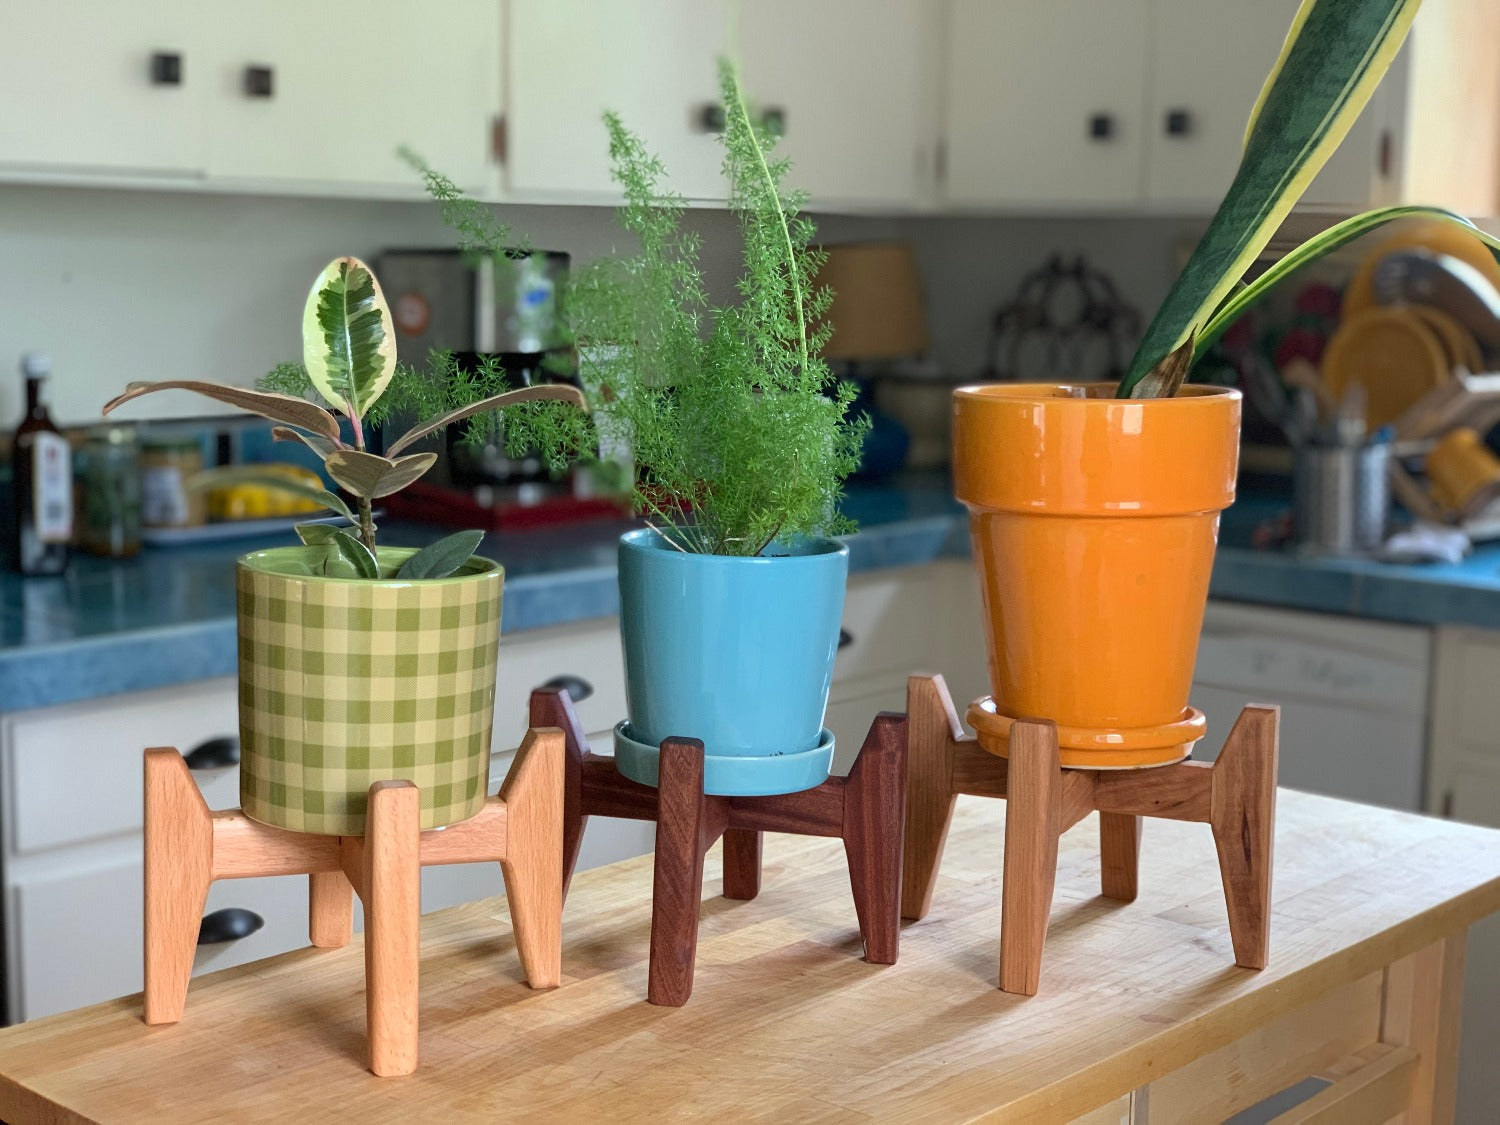 a photo of three little plant stands made by oregon handcraft featured in Sapele, Beech and Cherry hardwoods.